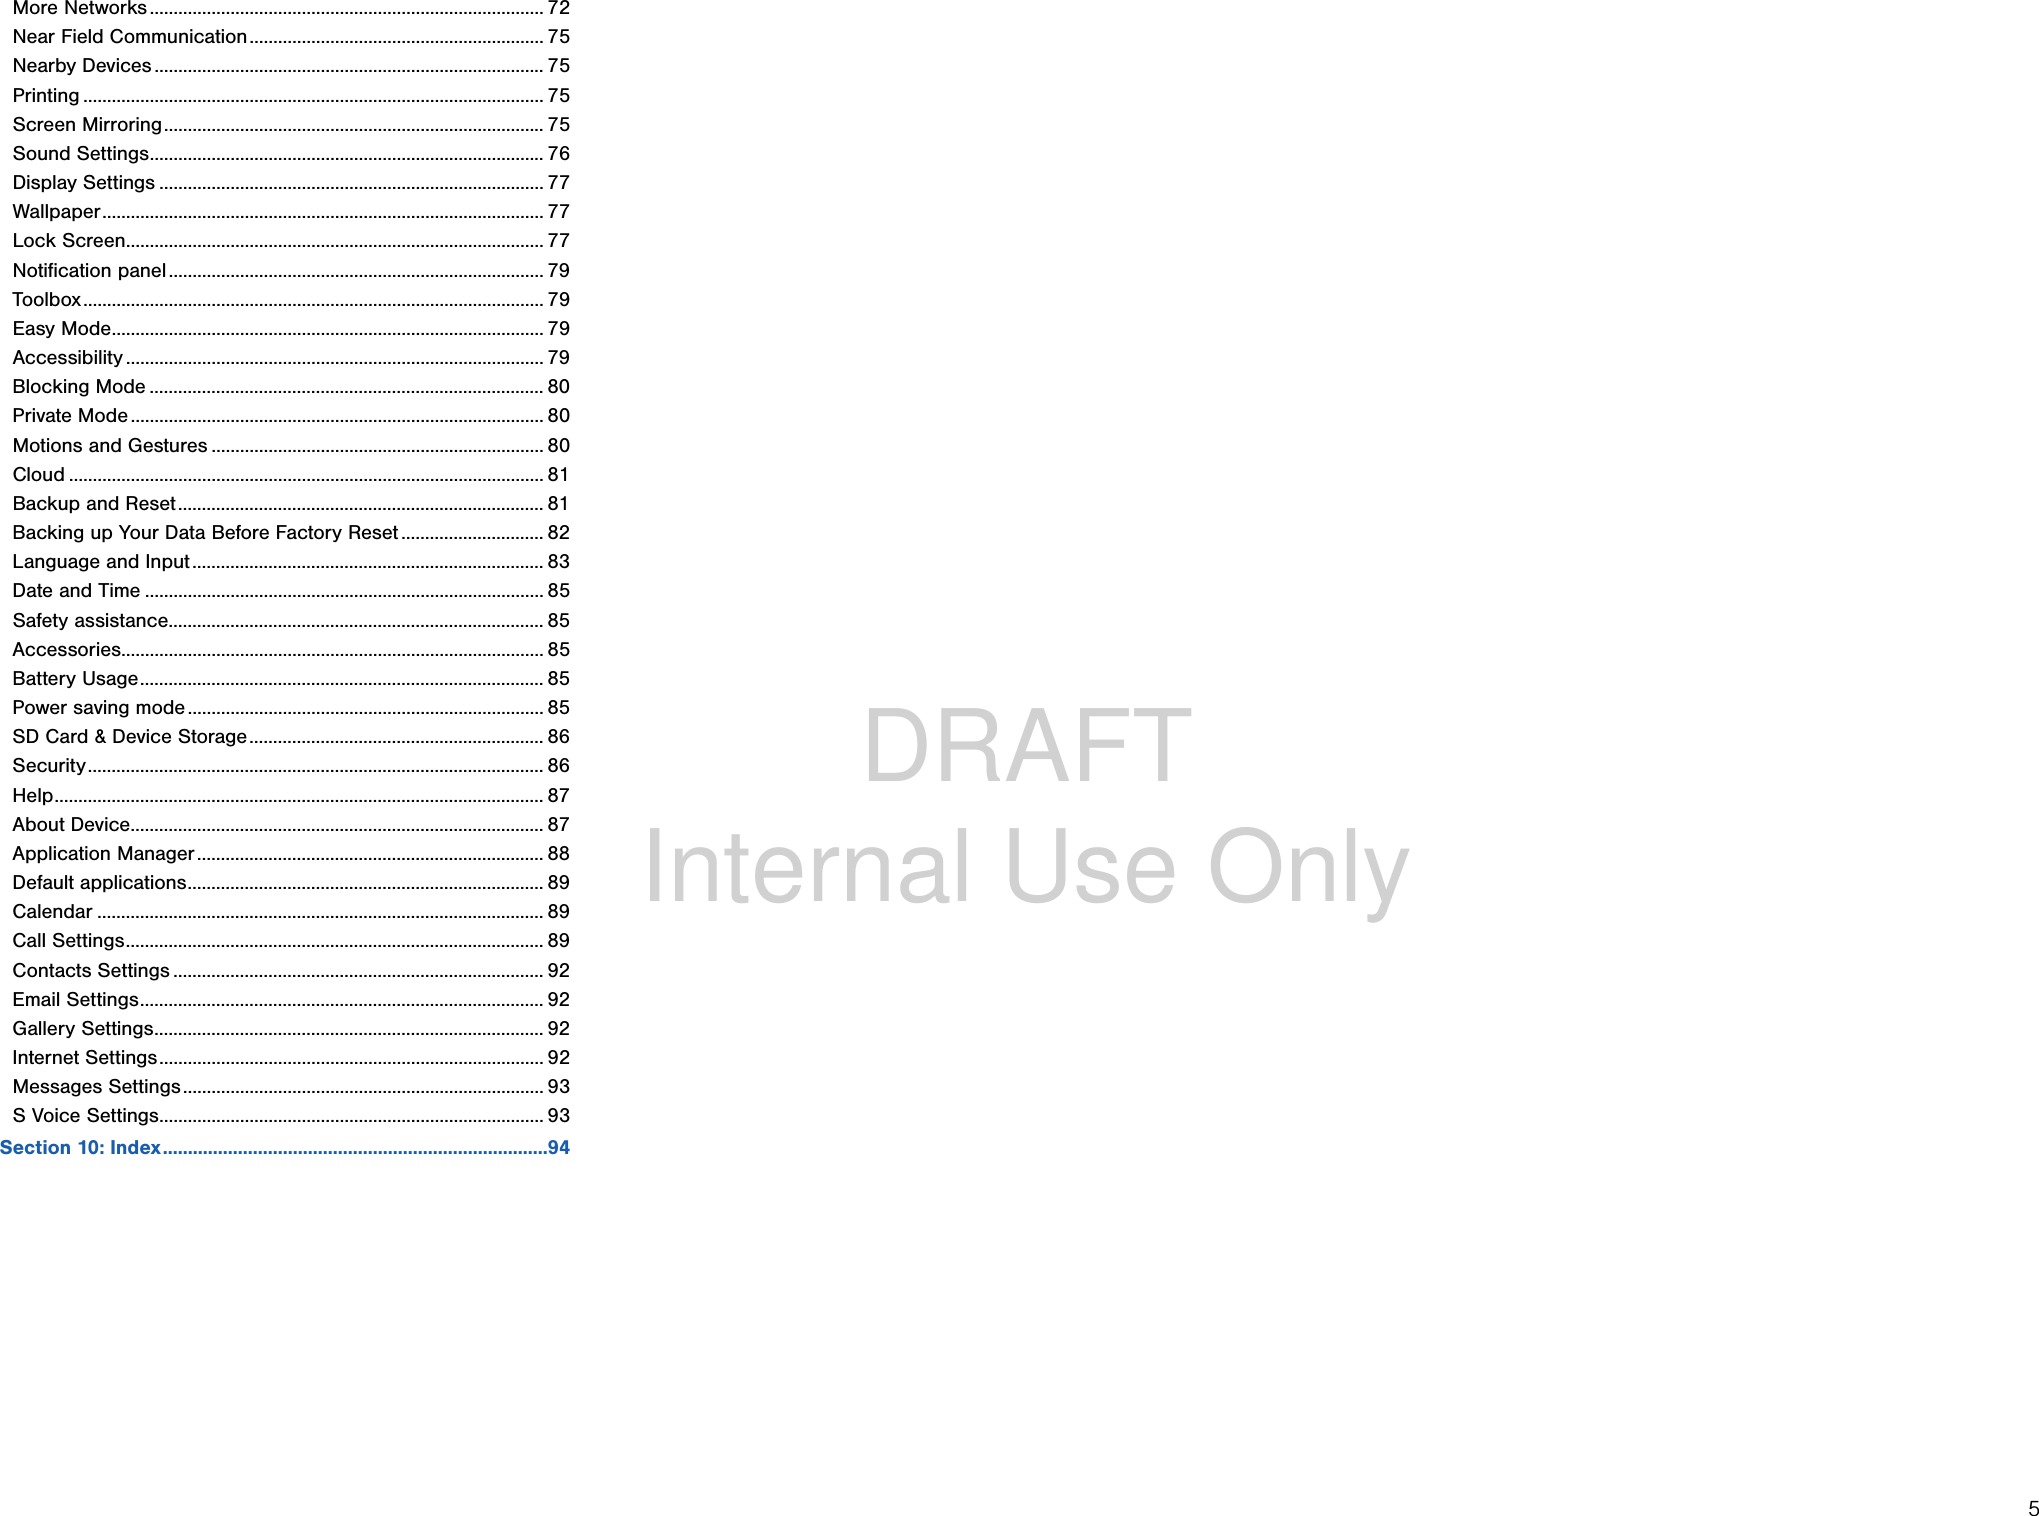 DRAFT Internal Use Only5More Networks ................................................................................... 72Near Field Communication .............................................................. 75Nearby Devices .................................................................................. 75Printing ................................................................................................. 75Screen Mirroring ................................................................................ 75Sound Settings ................................................................................... 76Display Settings ................................................................................. 77Wallpaper ............................................................................................. 77Lock Screen ........................................................................................ 77Notification panel ............................................................................... 79Toolbox ................................................................................................. 79Easy Mode ........................................................................................... 79Accessibility ........................................................................................ 79Blocking Mode ................................................................................... 80Private Mode ....................................................................................... 80Motions and Gestures ...................................................................... 80Cloud .................................................................................................... 81Backup and Reset ............................................................................. 81Backing up Your Data Before Factory Reset .............................. 82Language and Input .......................................................................... 83Date and Time .................................................................................... 85Safety assistance ............................................................................... 85Accessories......................................................................................... 85Battery Usage ..................................................................................... 85Power saving mode ........................................................................... 85SD Card &amp; Device Storage .............................................................. 86Security ................................................................................................ 86Help ....................................................................................................... 87About Device ....................................................................................... 87Application Manager ......................................................................... 88Default applications ........................................................................... 89Calendar .............................................................................................. 89Call Settings ........................................................................................ 89Contacts Settings .............................................................................. 92Email Settings ..................................................................................... 92Gallery Settings .................................................................................. 92Internet Settings ................................................................................. 92Messages Settings ............................................................................ 93S Voice Settings ................................................................................. 93Section 10: Index .............................................................................94